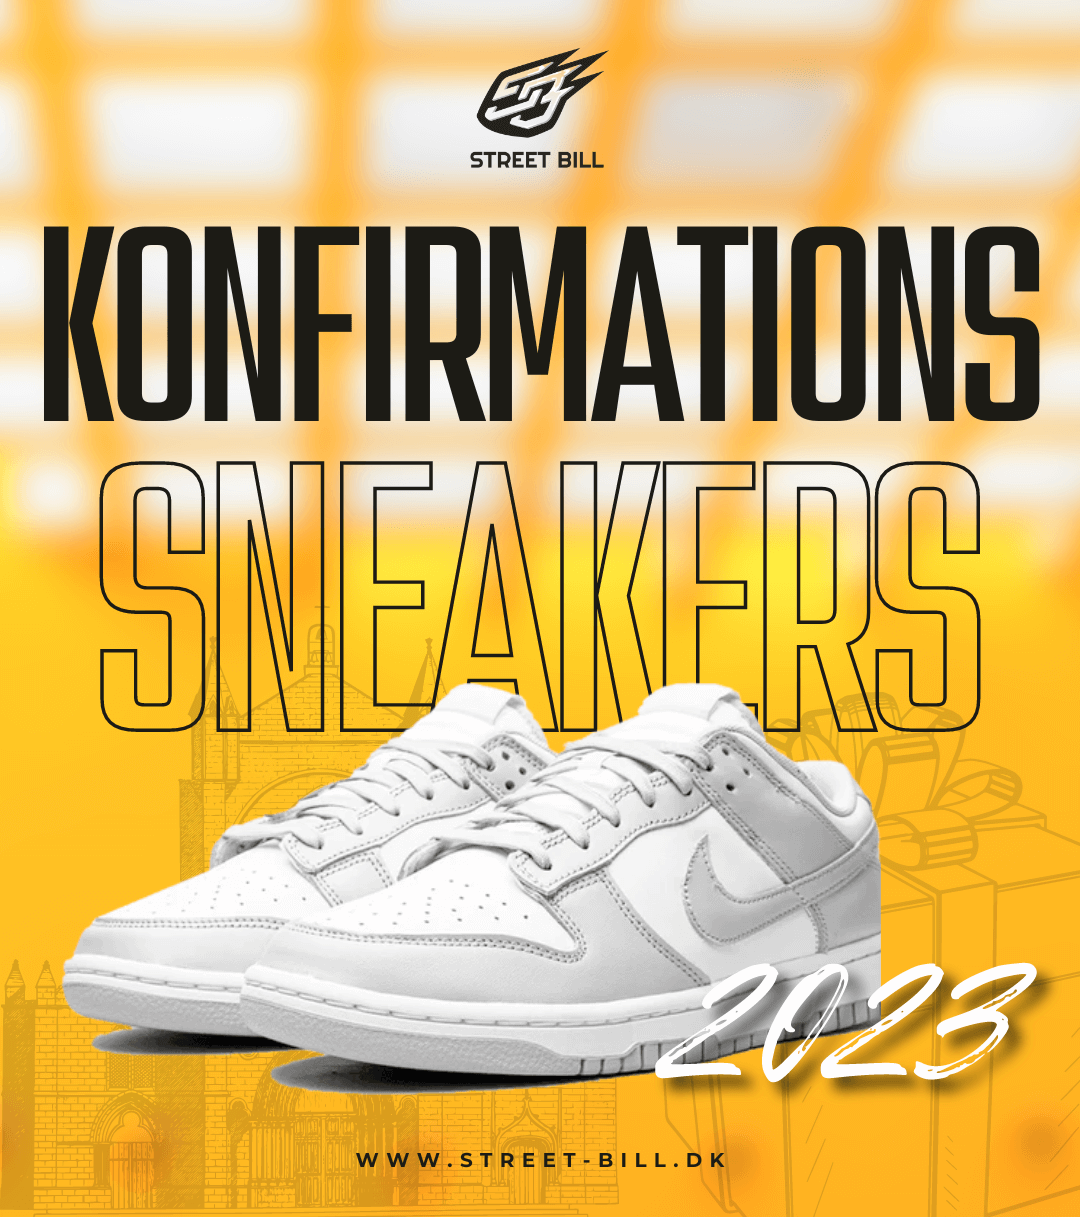 Find dine konfirmations sneakers her - 2023